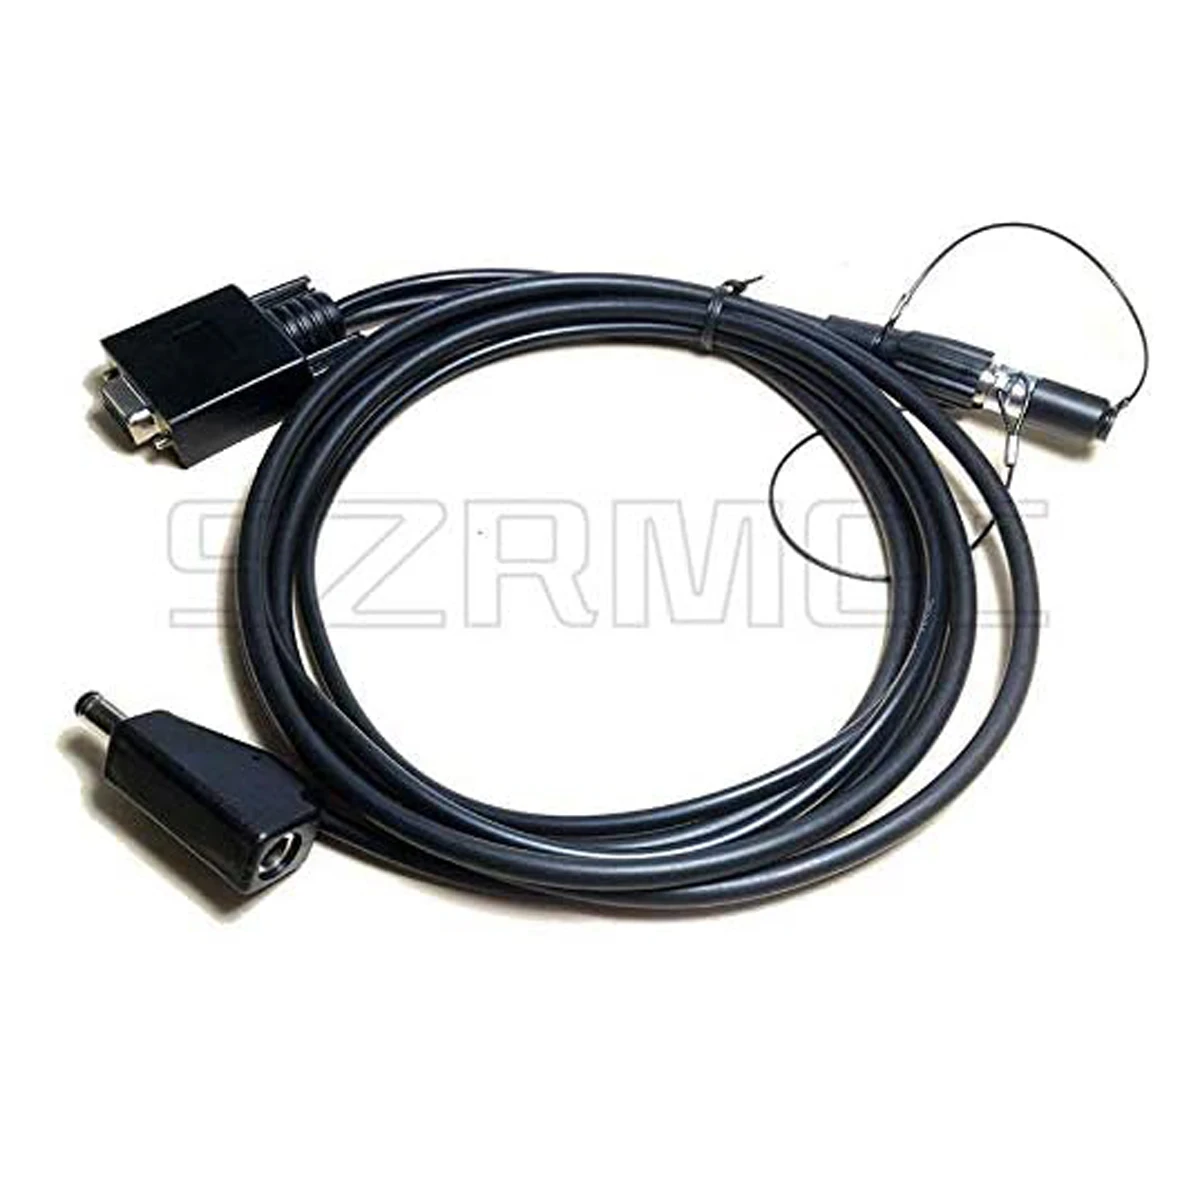 

Trimble GPS 5700 5800 R6 R7 R8 Power Data Cable 7 Pin to RS232 DB9 Trimble 32345/59044 Type